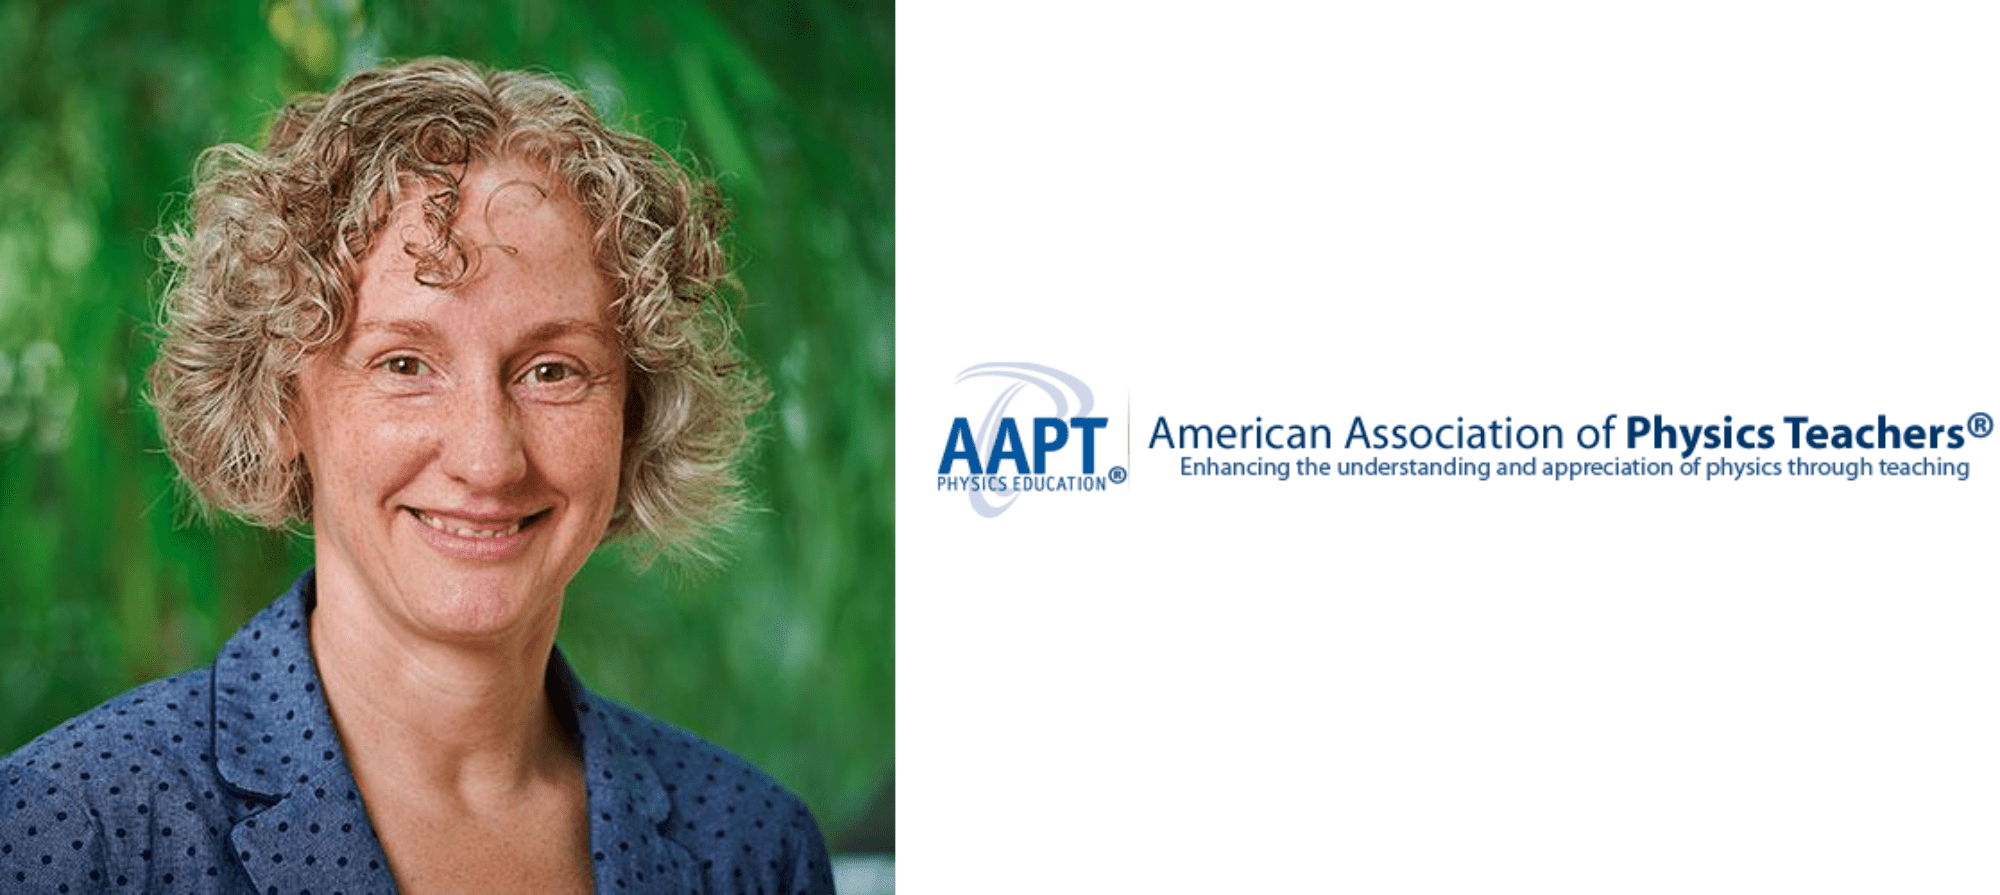 Beth Parks portrait with AAPT logo